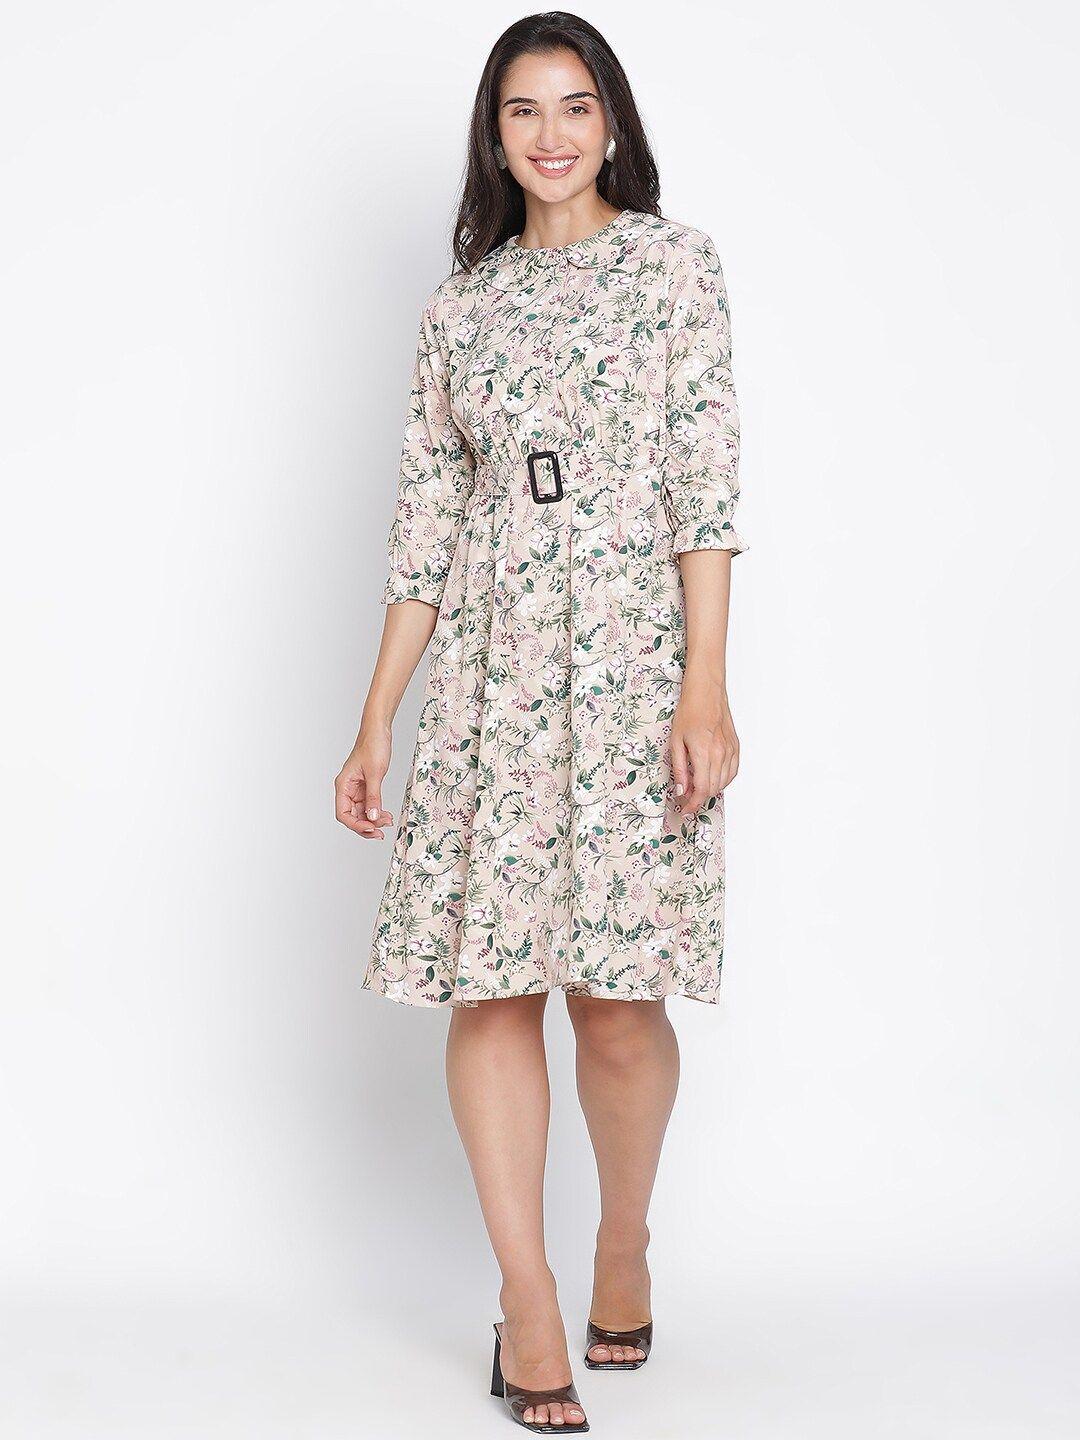 draax-fashions-floral-printed-fit-&-flare-dress